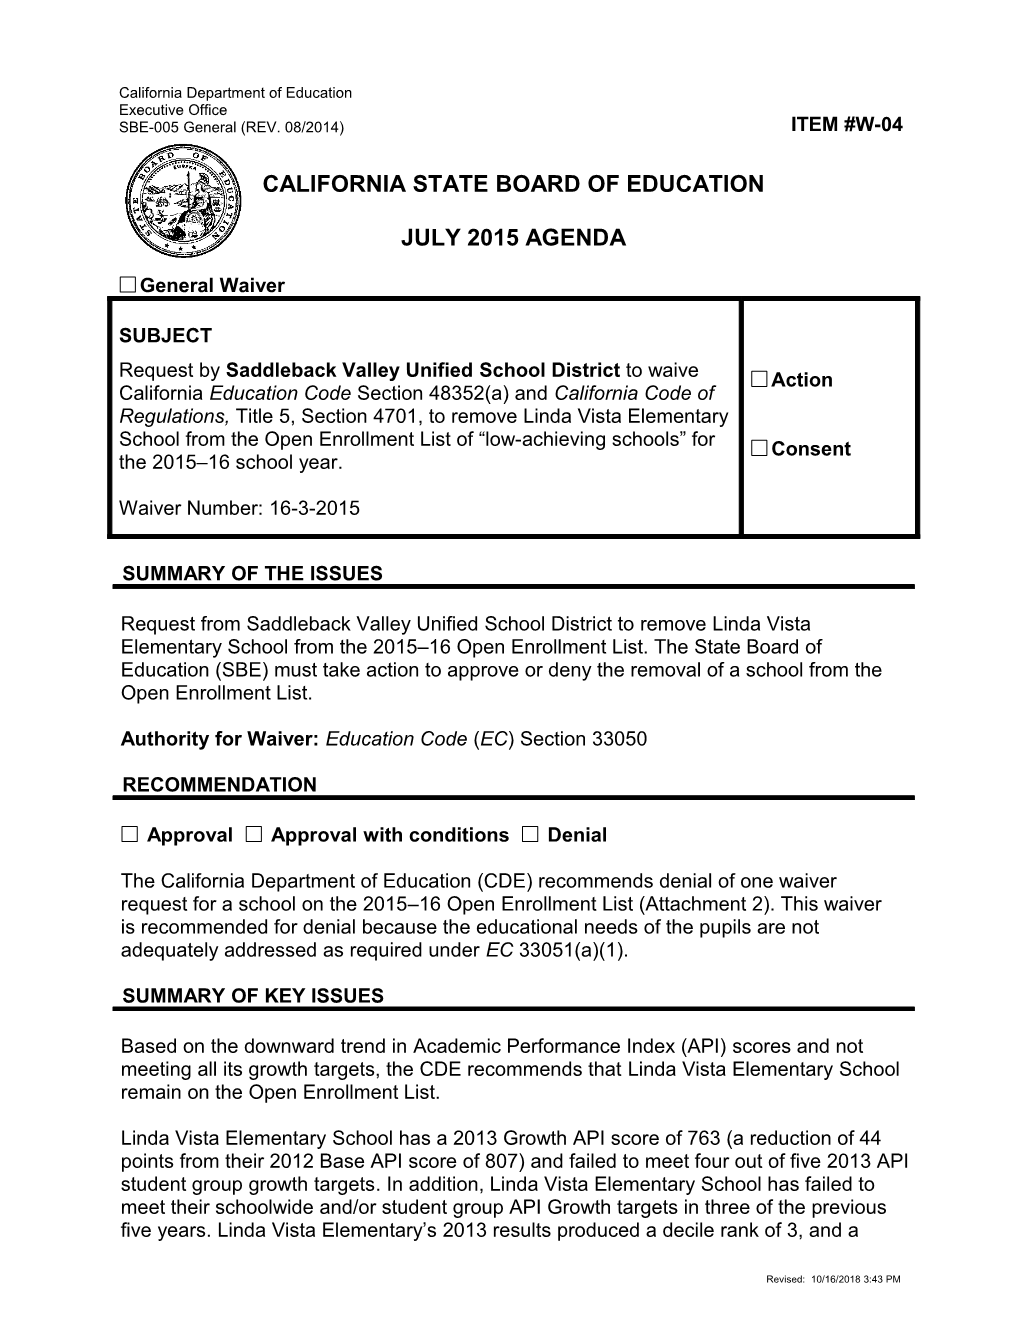 July 2015 Waiver Item W-04 - Meeting Agendas (CA State Board of Education)